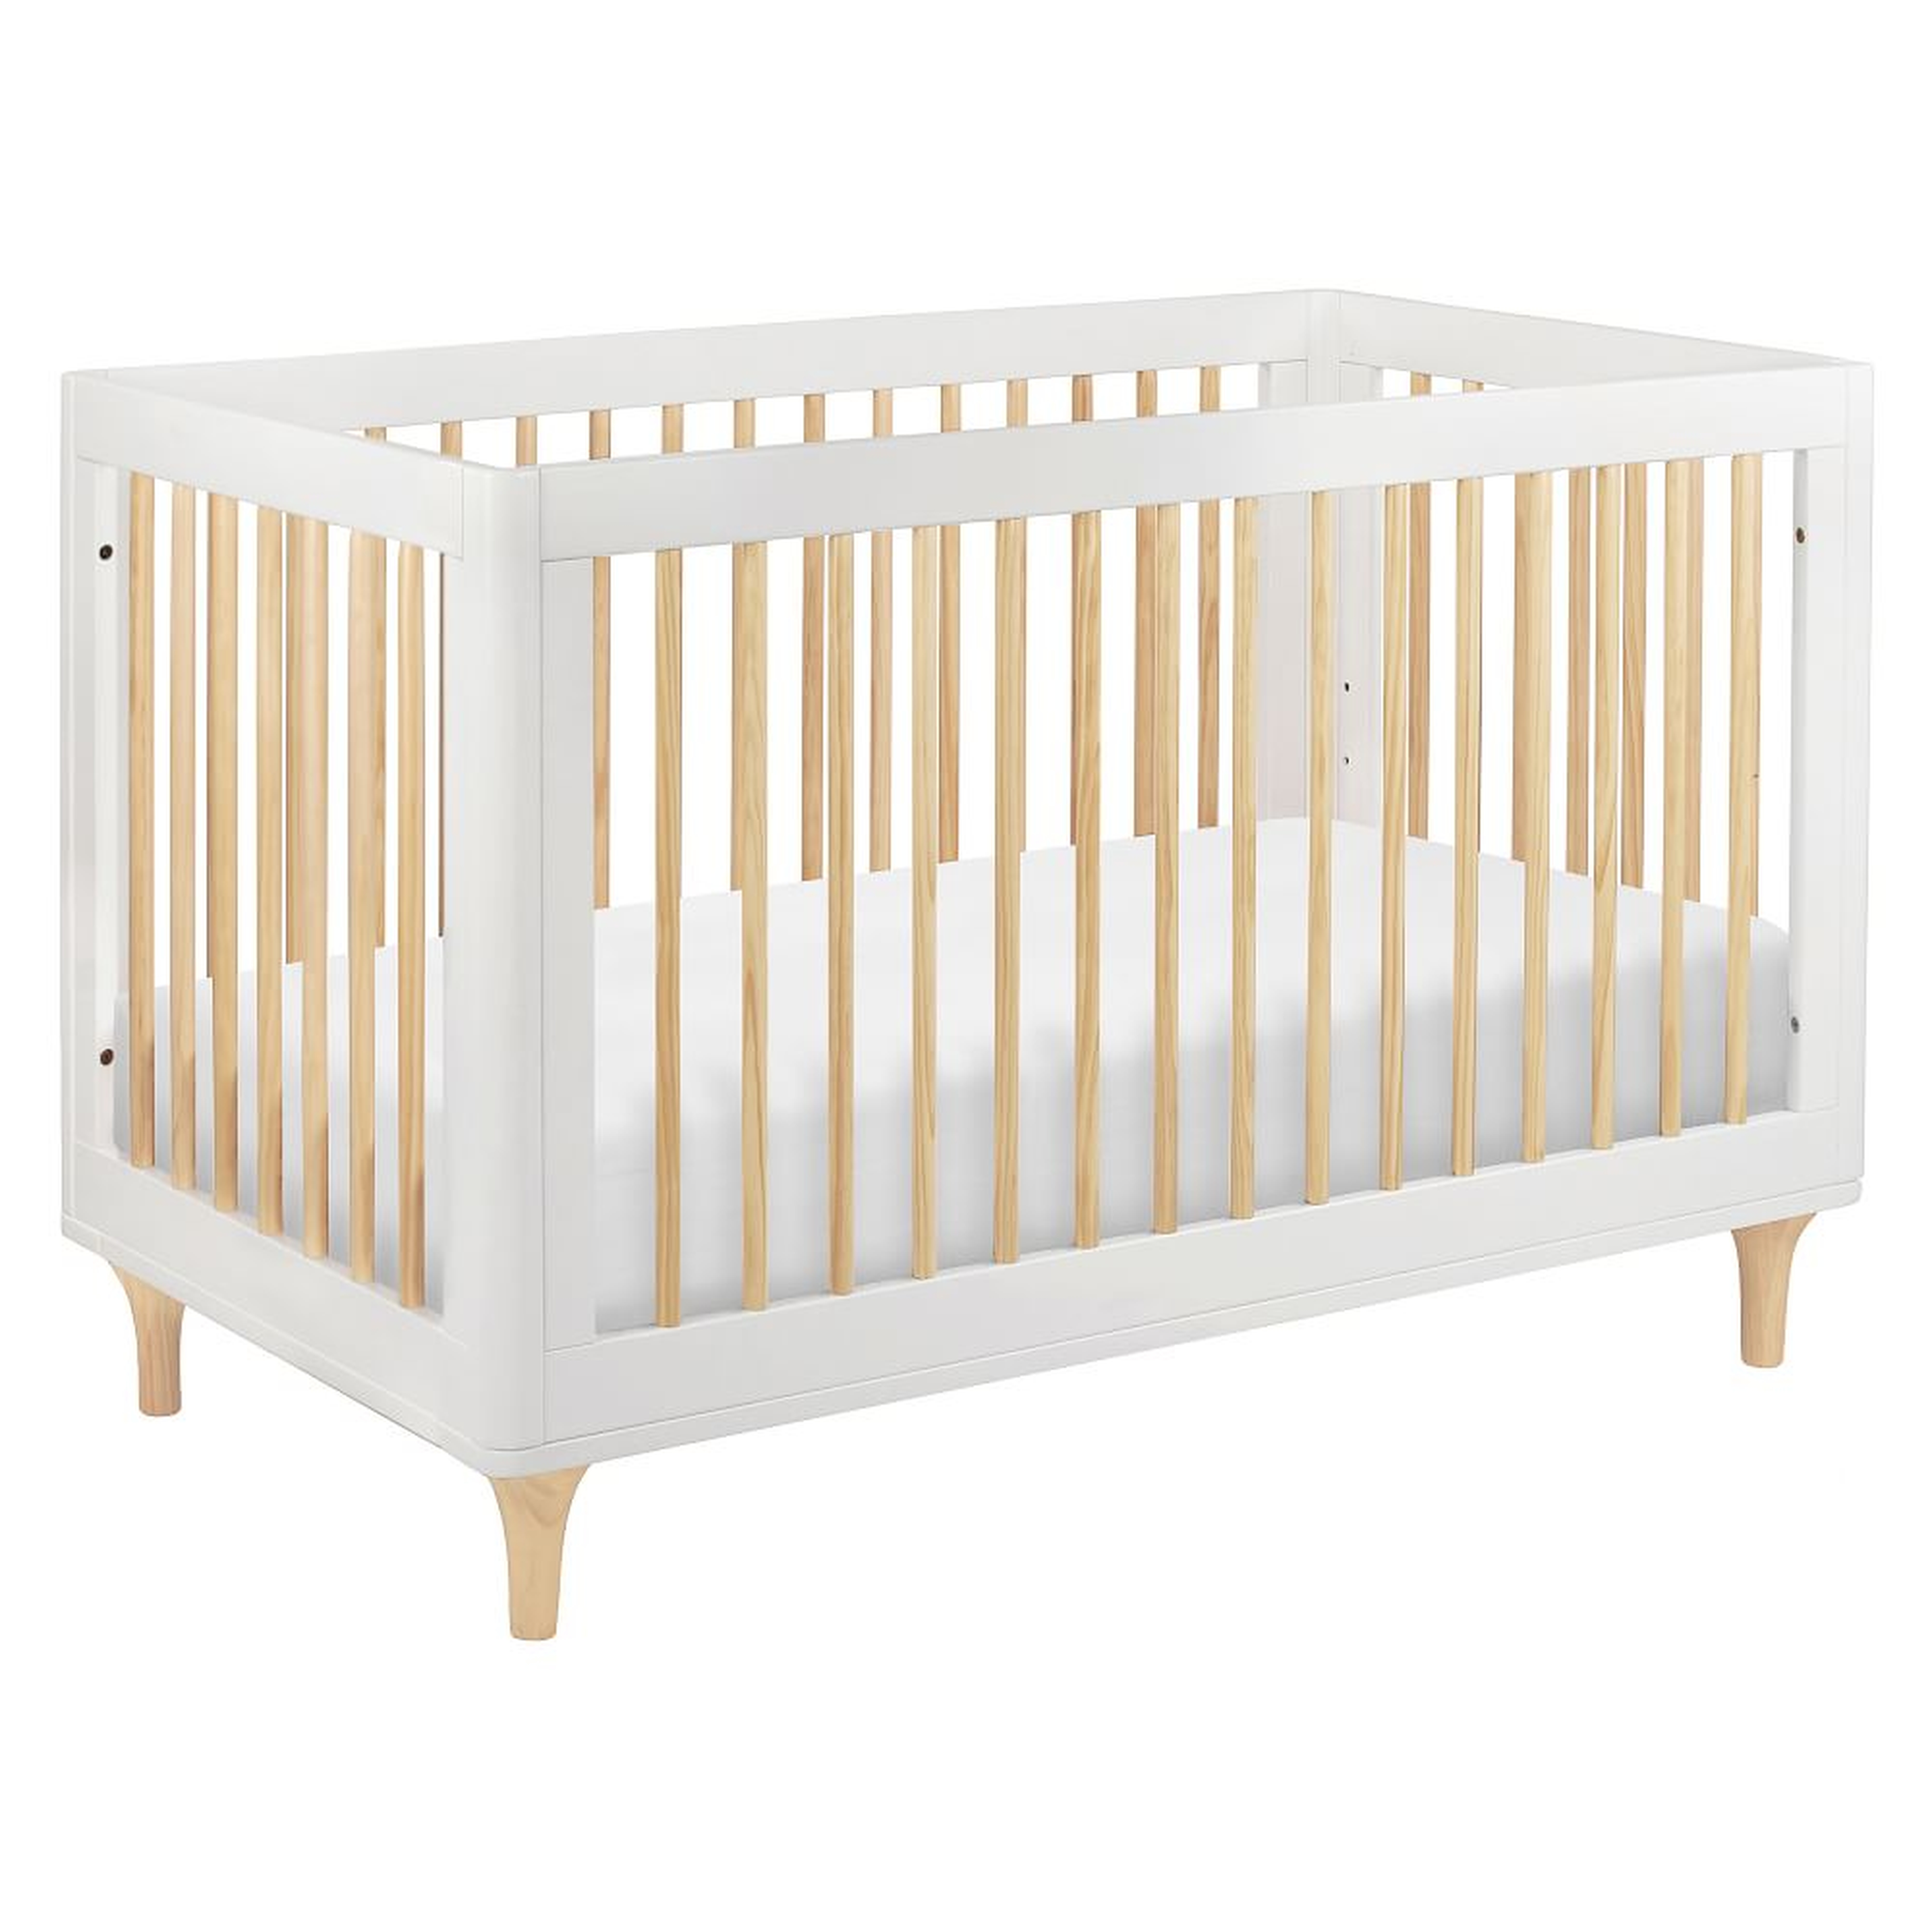 Lolly 3-in-1 Convertible Crib with Toddler Bed Conversion Kit, White/Natural, WE Kids - West Elm